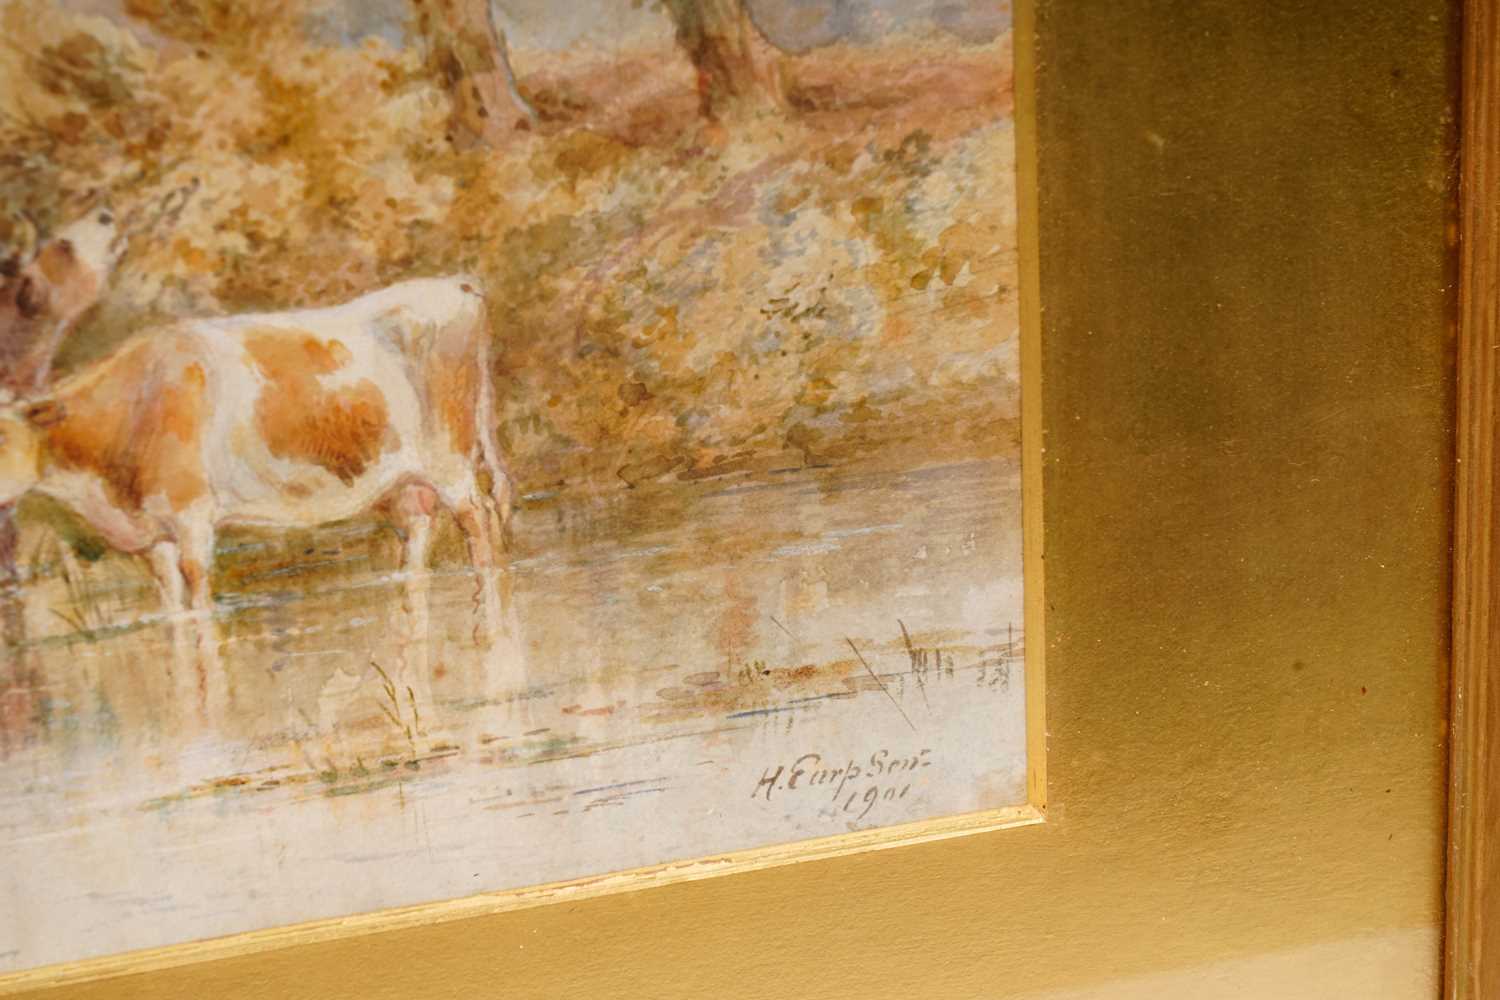 Henry Earp Snr - Cattle in a Stream | watercolour - Image 5 of 6